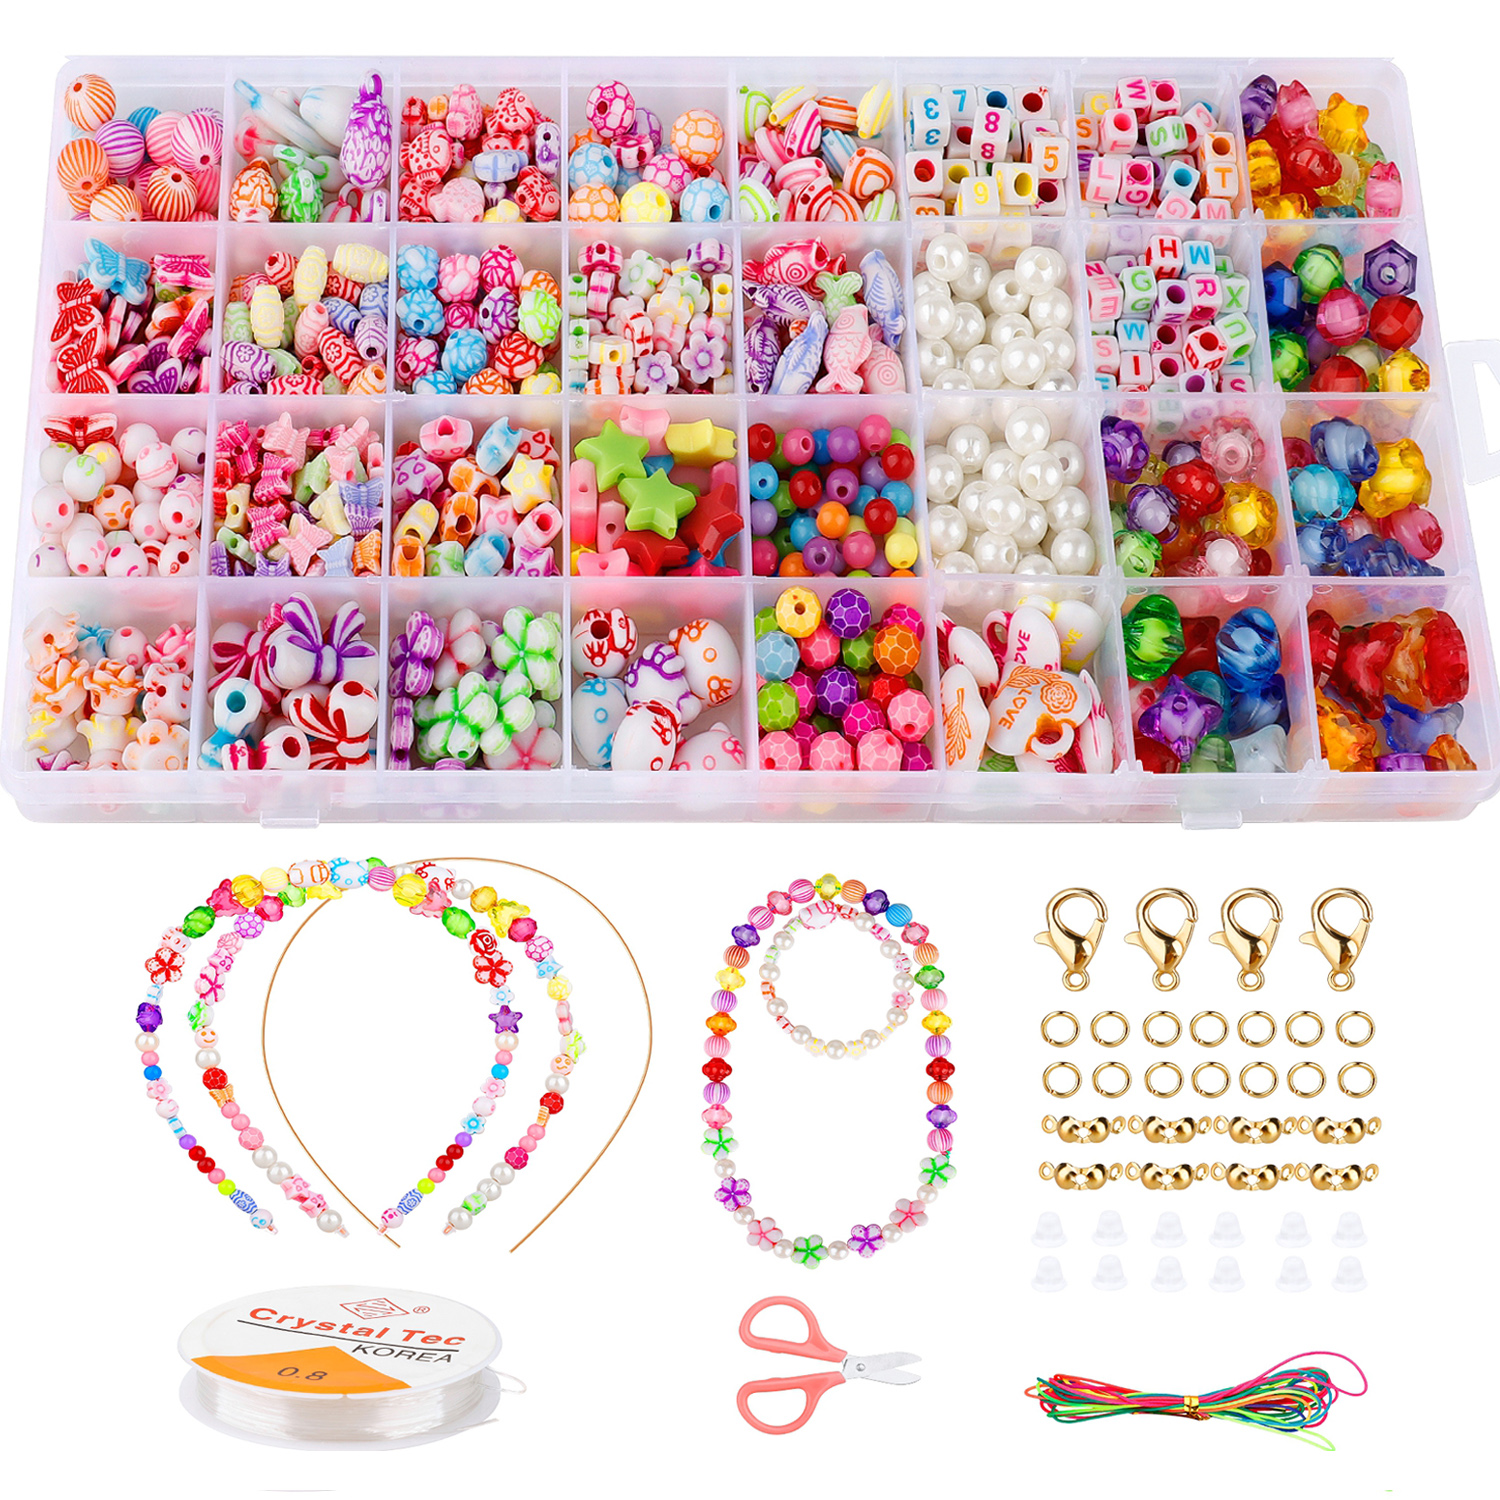 32 Styles Beads Set forJewellery Making Kids &Crafts&Name Bracelets And DIY Necklace Bracelets Letter Alphabet Colorful Acrylic Crafting Beads Kit Box with Accessories - image 1 of 9